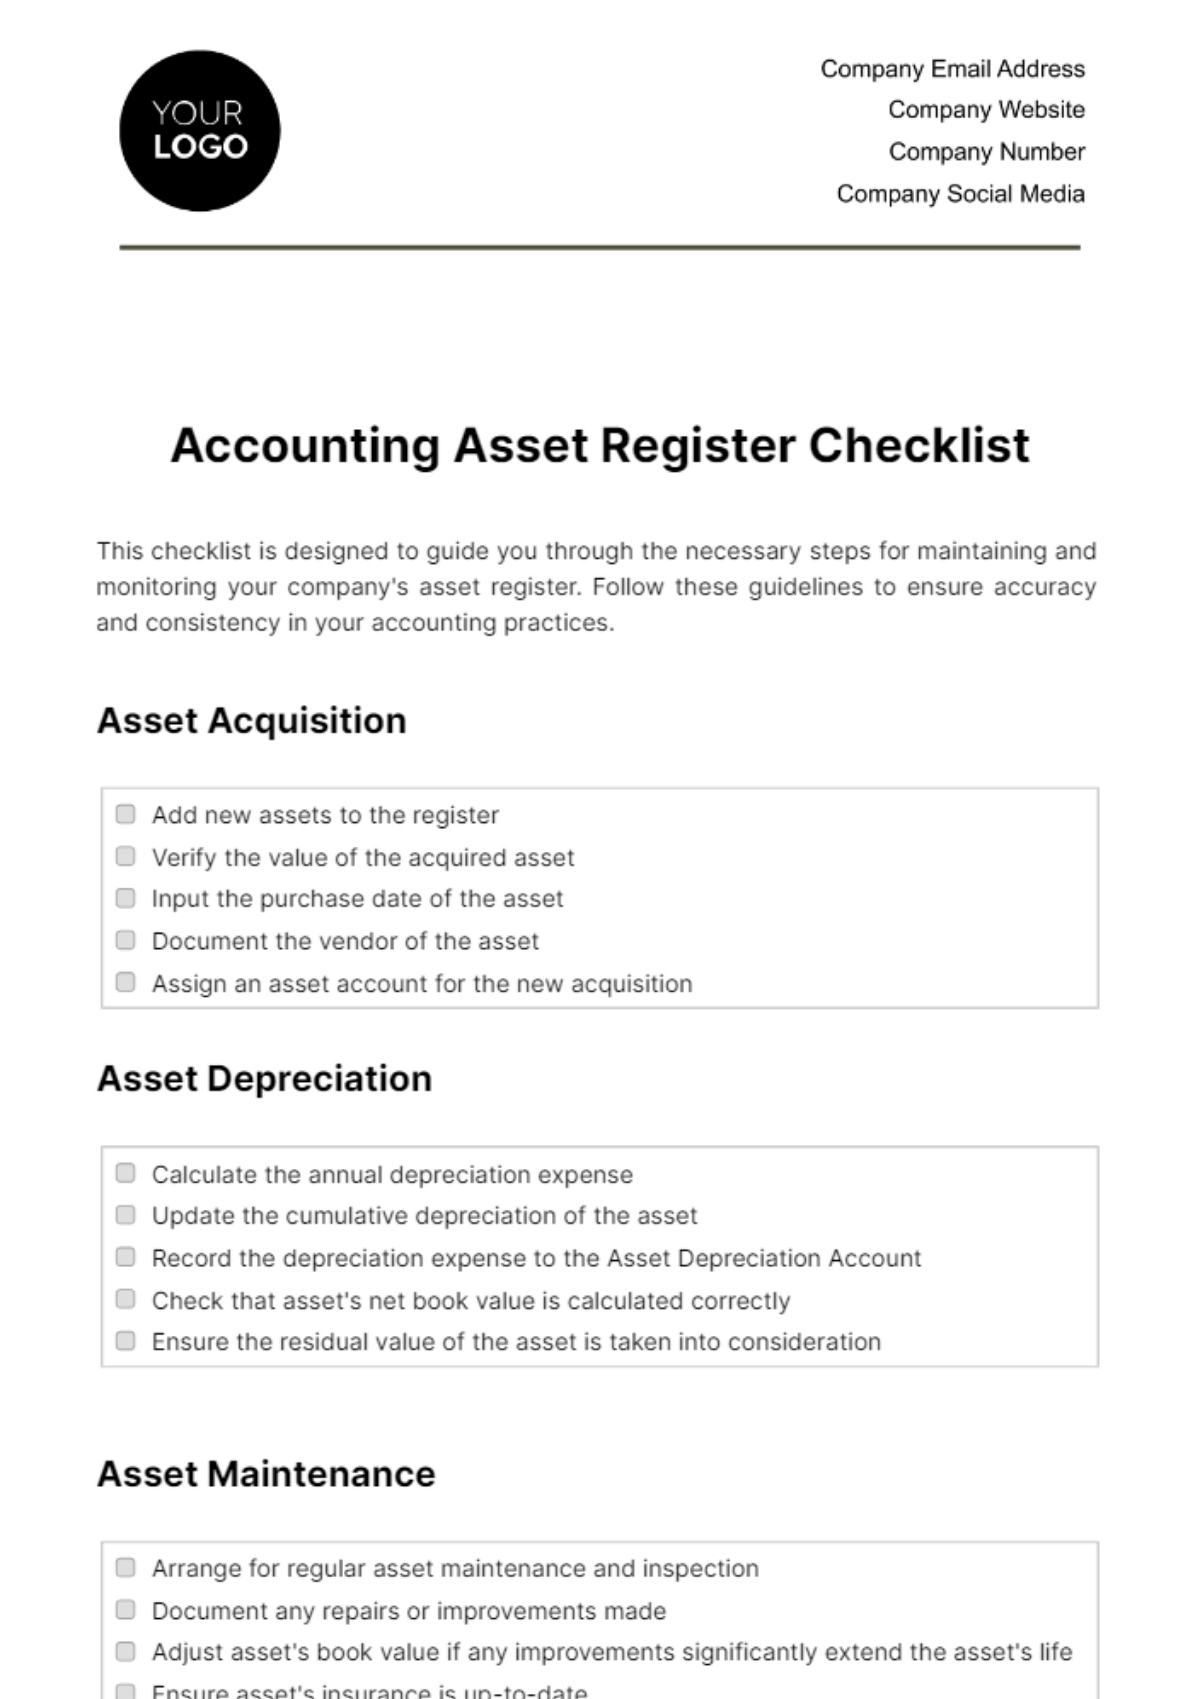 Accounting Asset Register Checklist Template